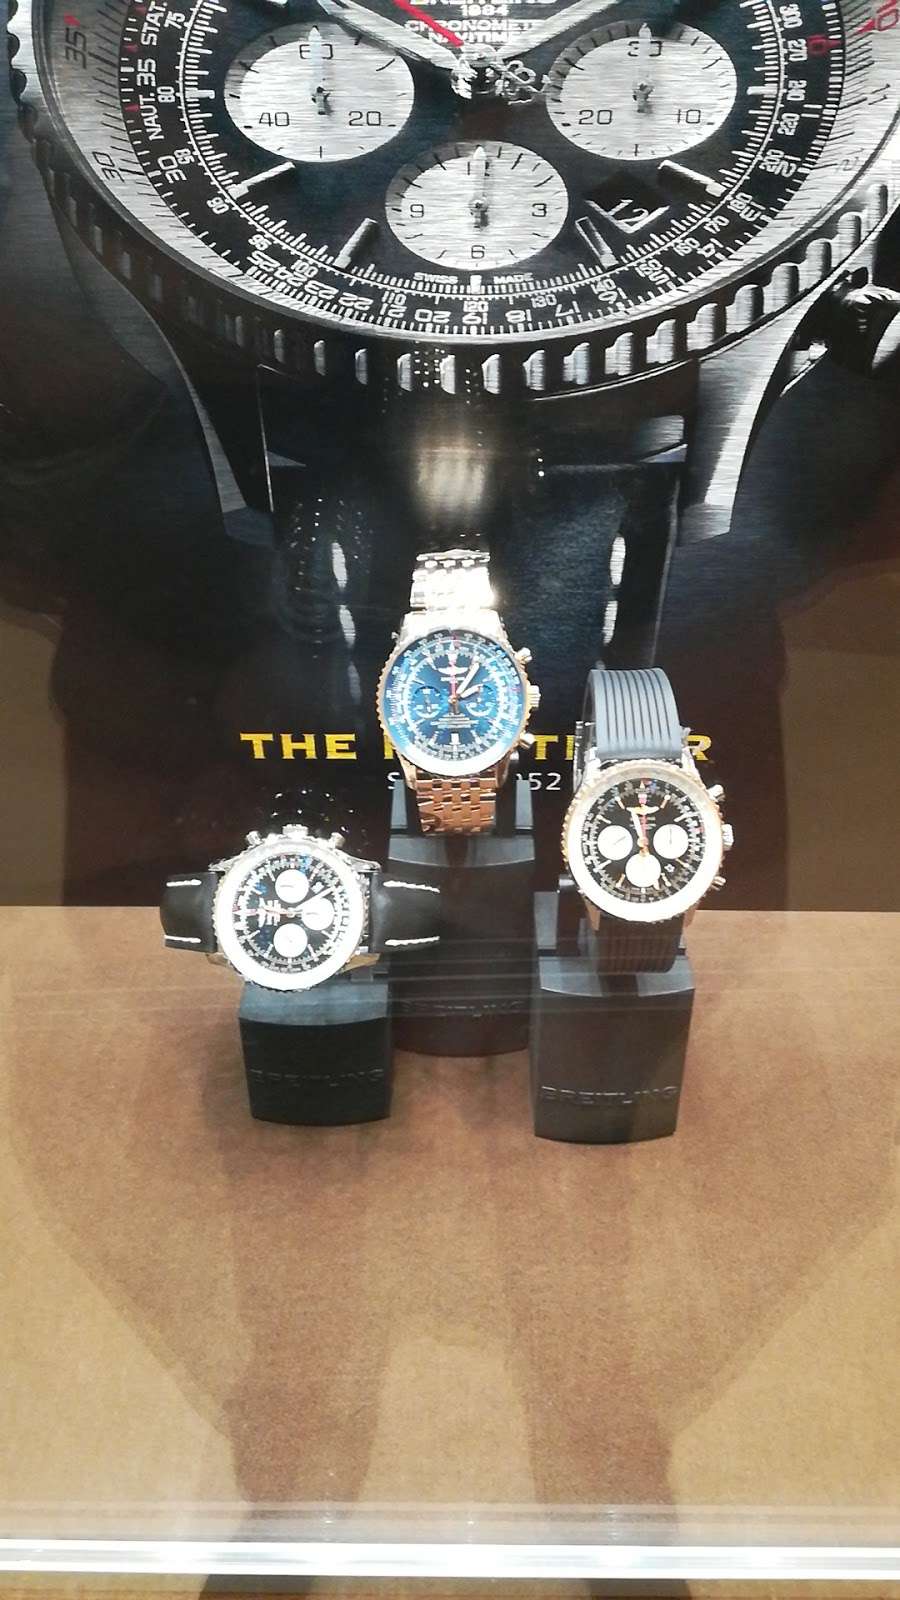 Breitling Boutique | MGM, 101 MGM National Ave, Oxon Hill, MD 20745, USA | Phone: (301) 839-6000